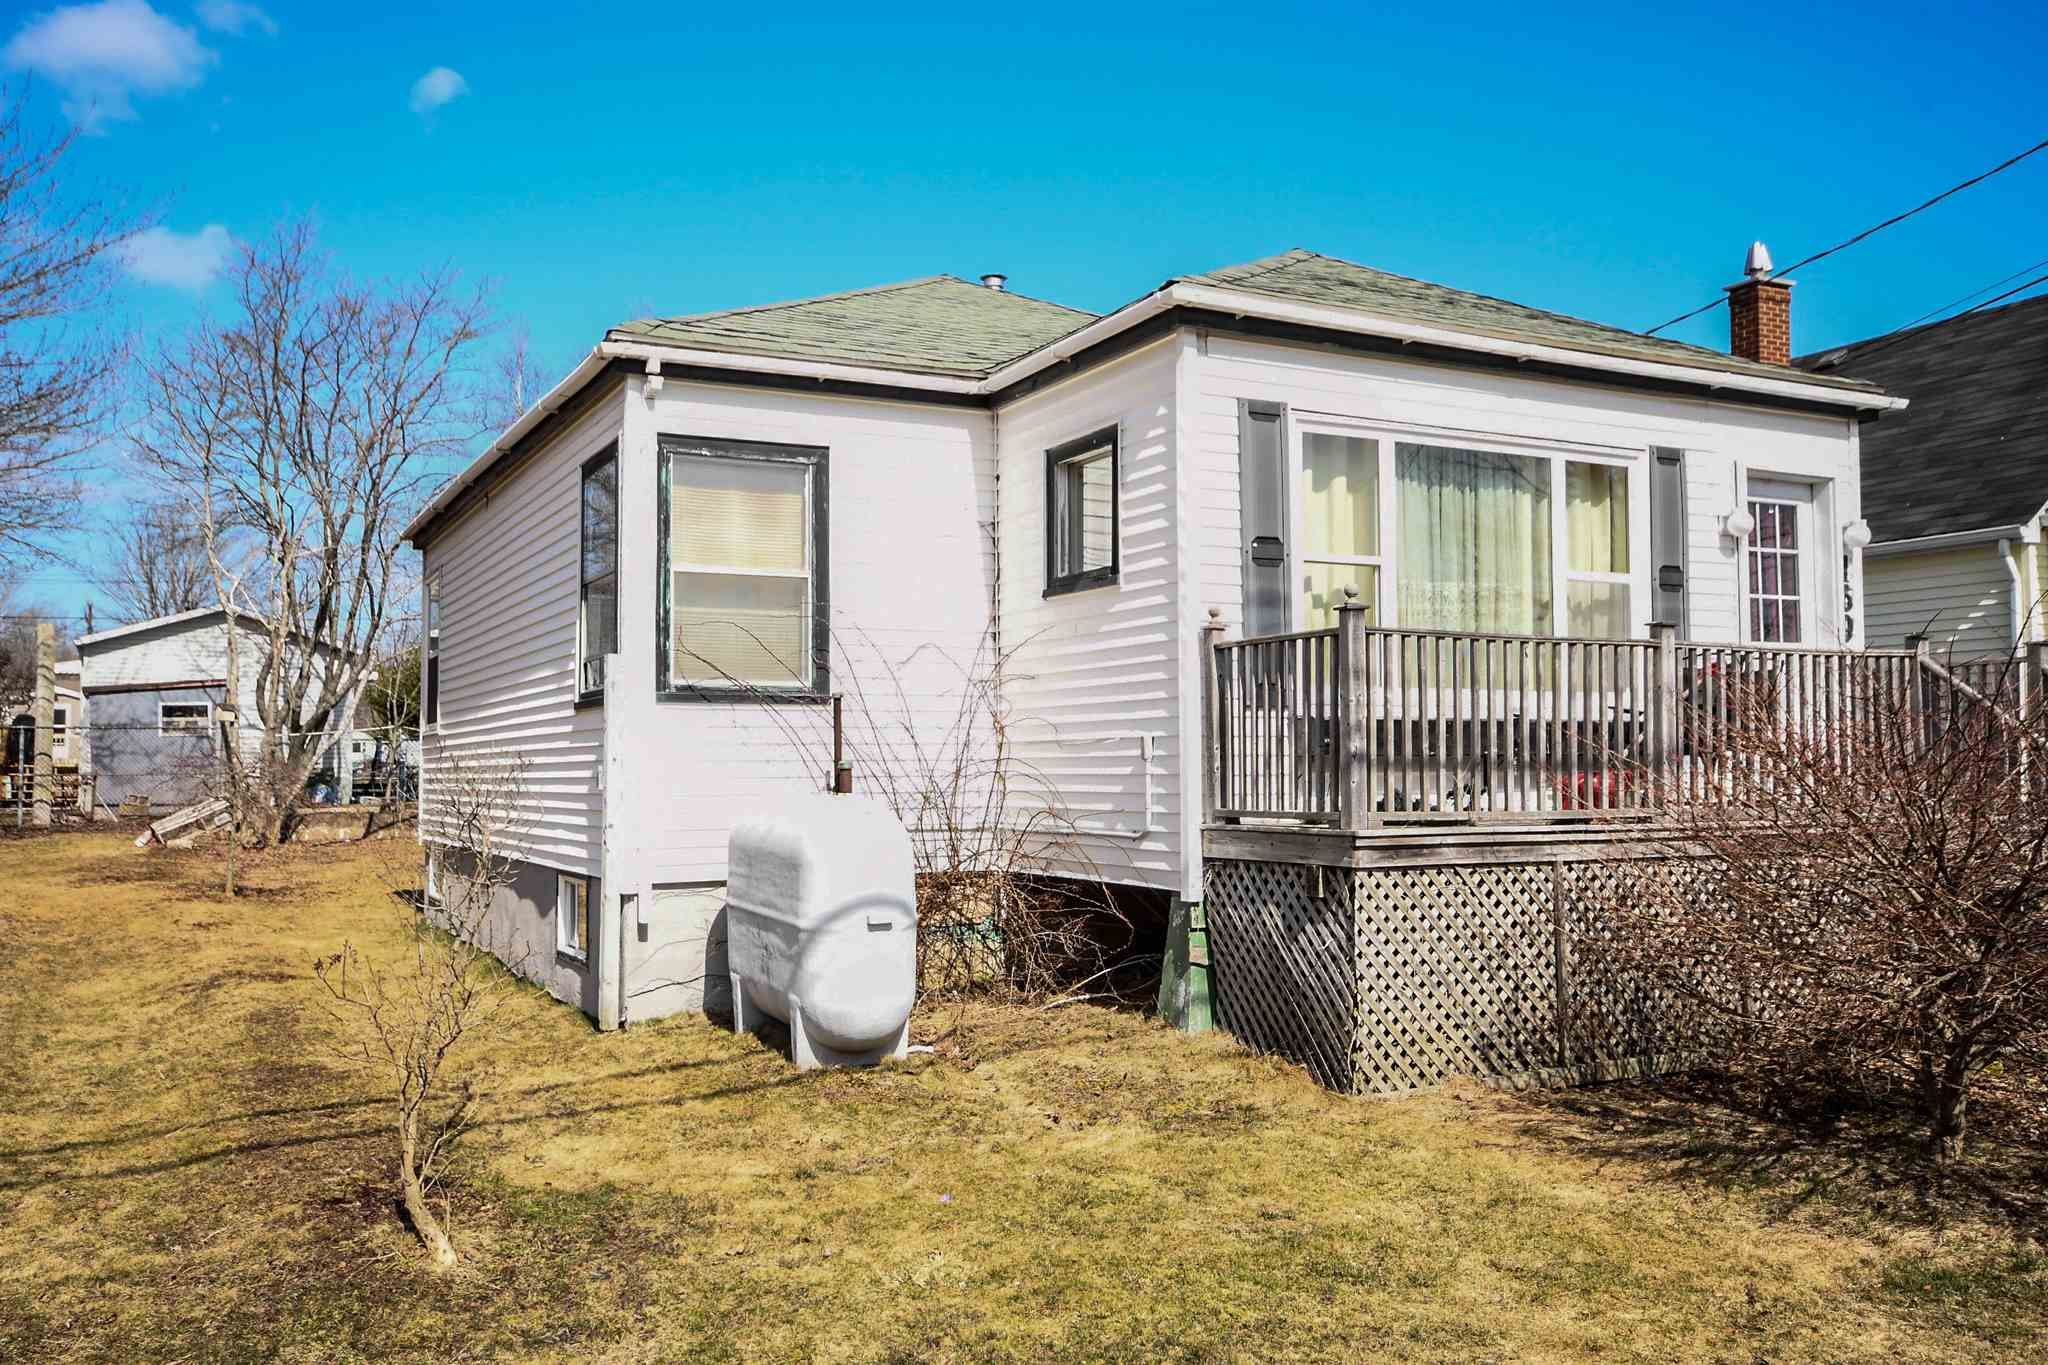 Photo 2: Photos: 169 Main Avenue in Fairview: 6-Fairview Residential for sale (Halifax-Dartmouth)  : MLS®# 202105999